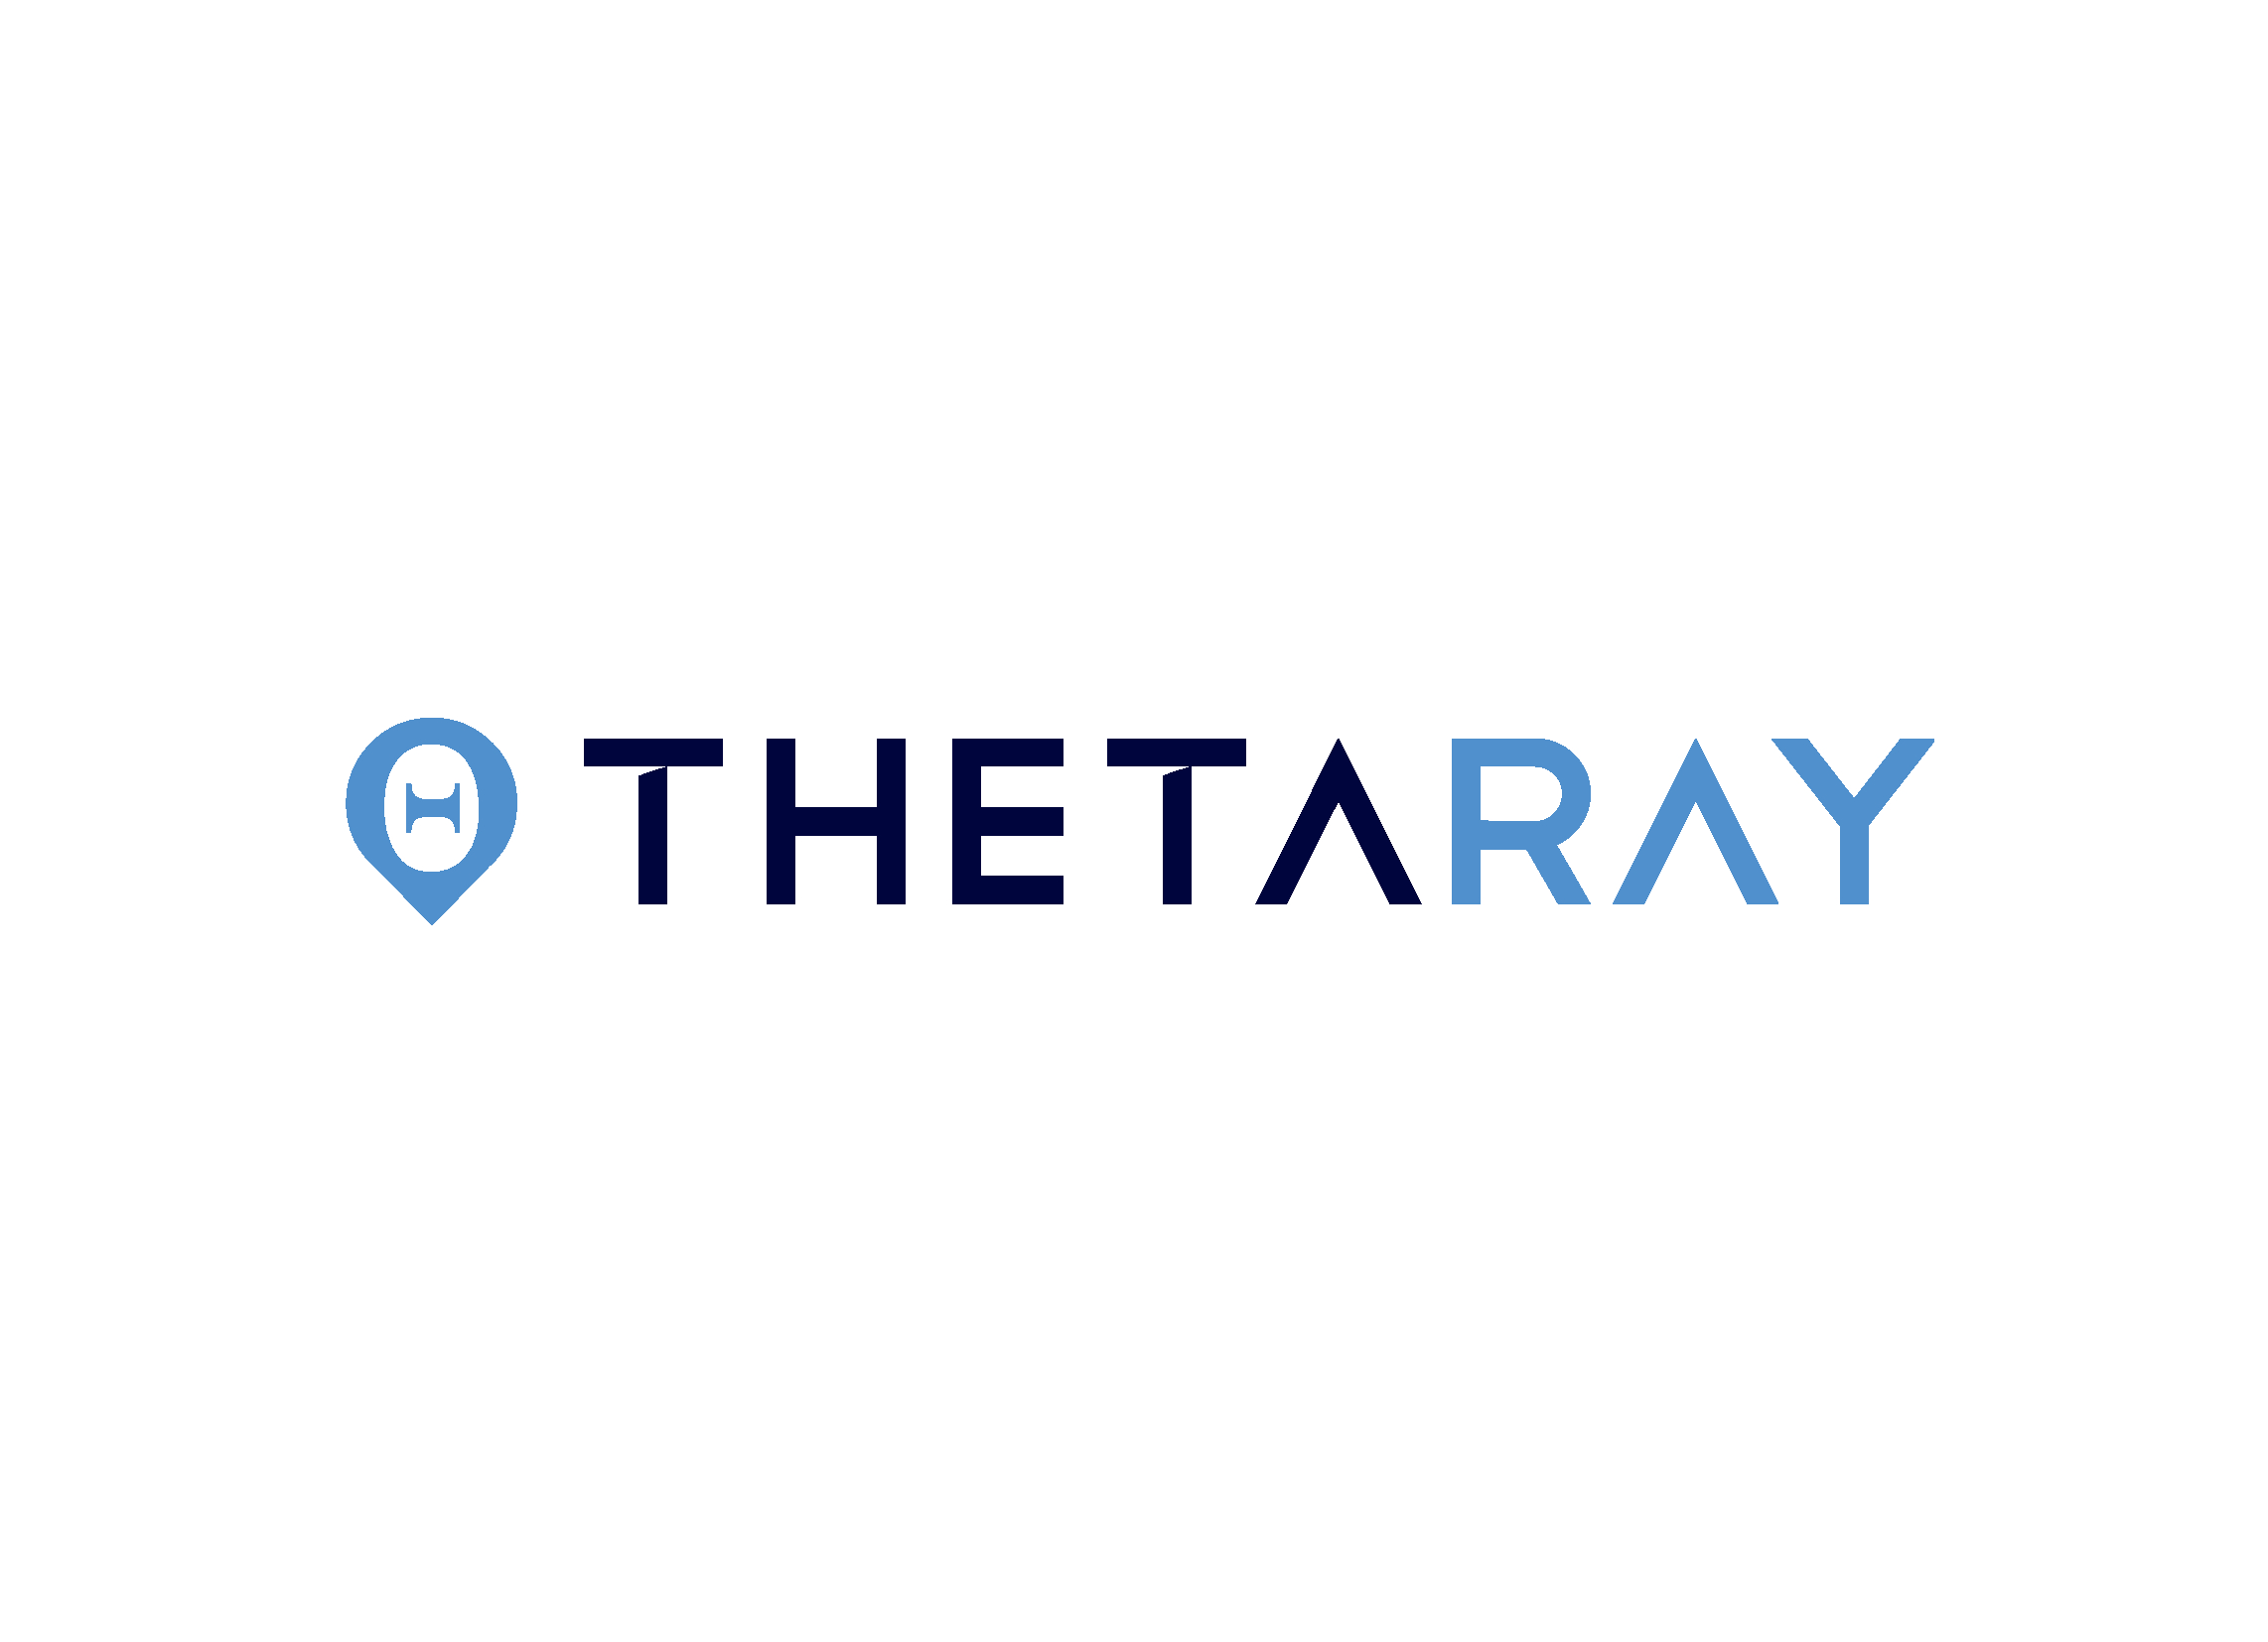 Dubai-based NOW Money Selects ThetaRay AI Tech to Prevent Financial Crime  on the Inclusive Banking App | Business Wire